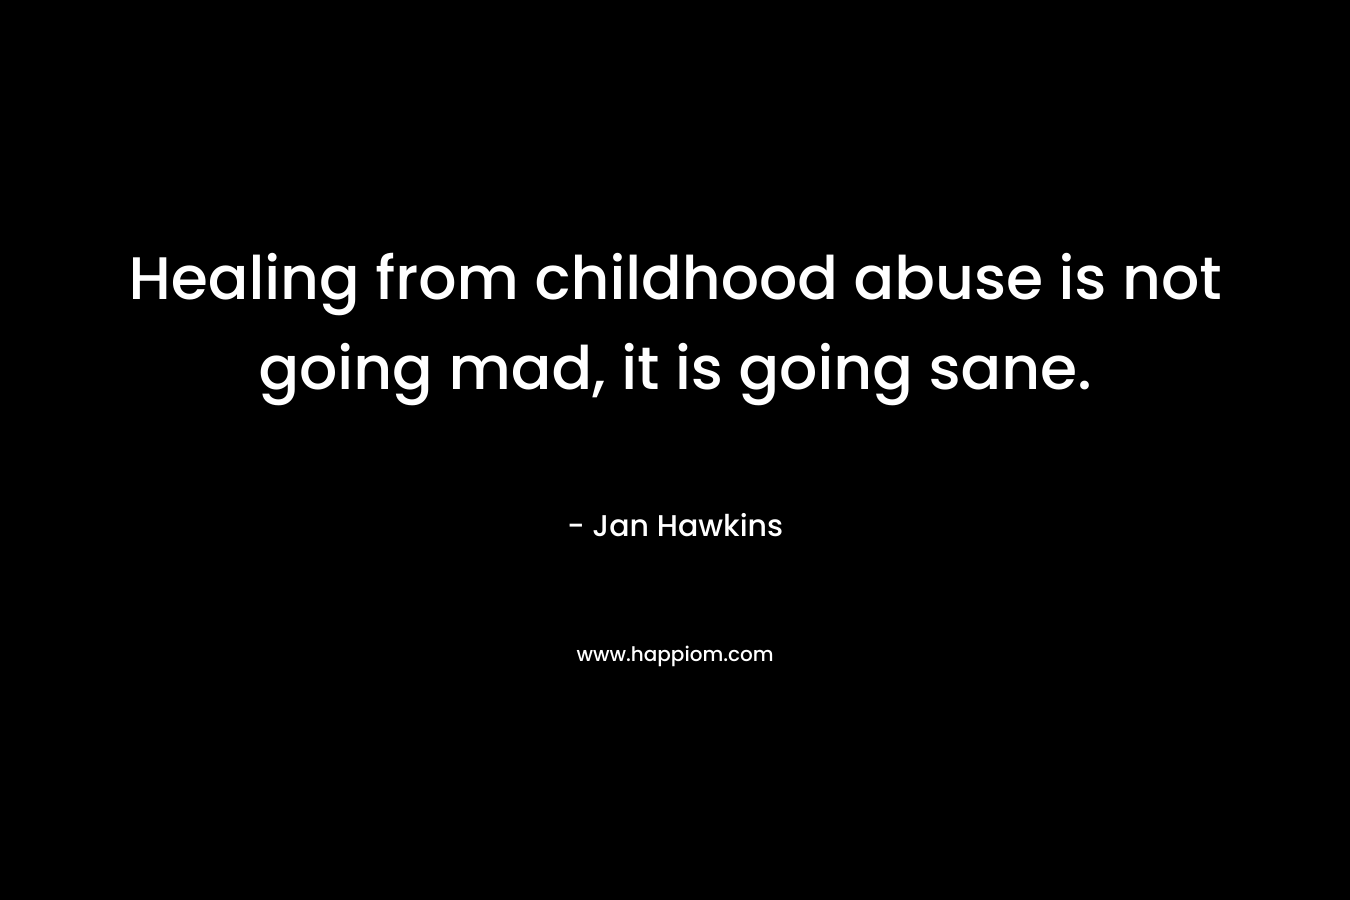 Healing from childhood abuse is not going mad, it is going sane.